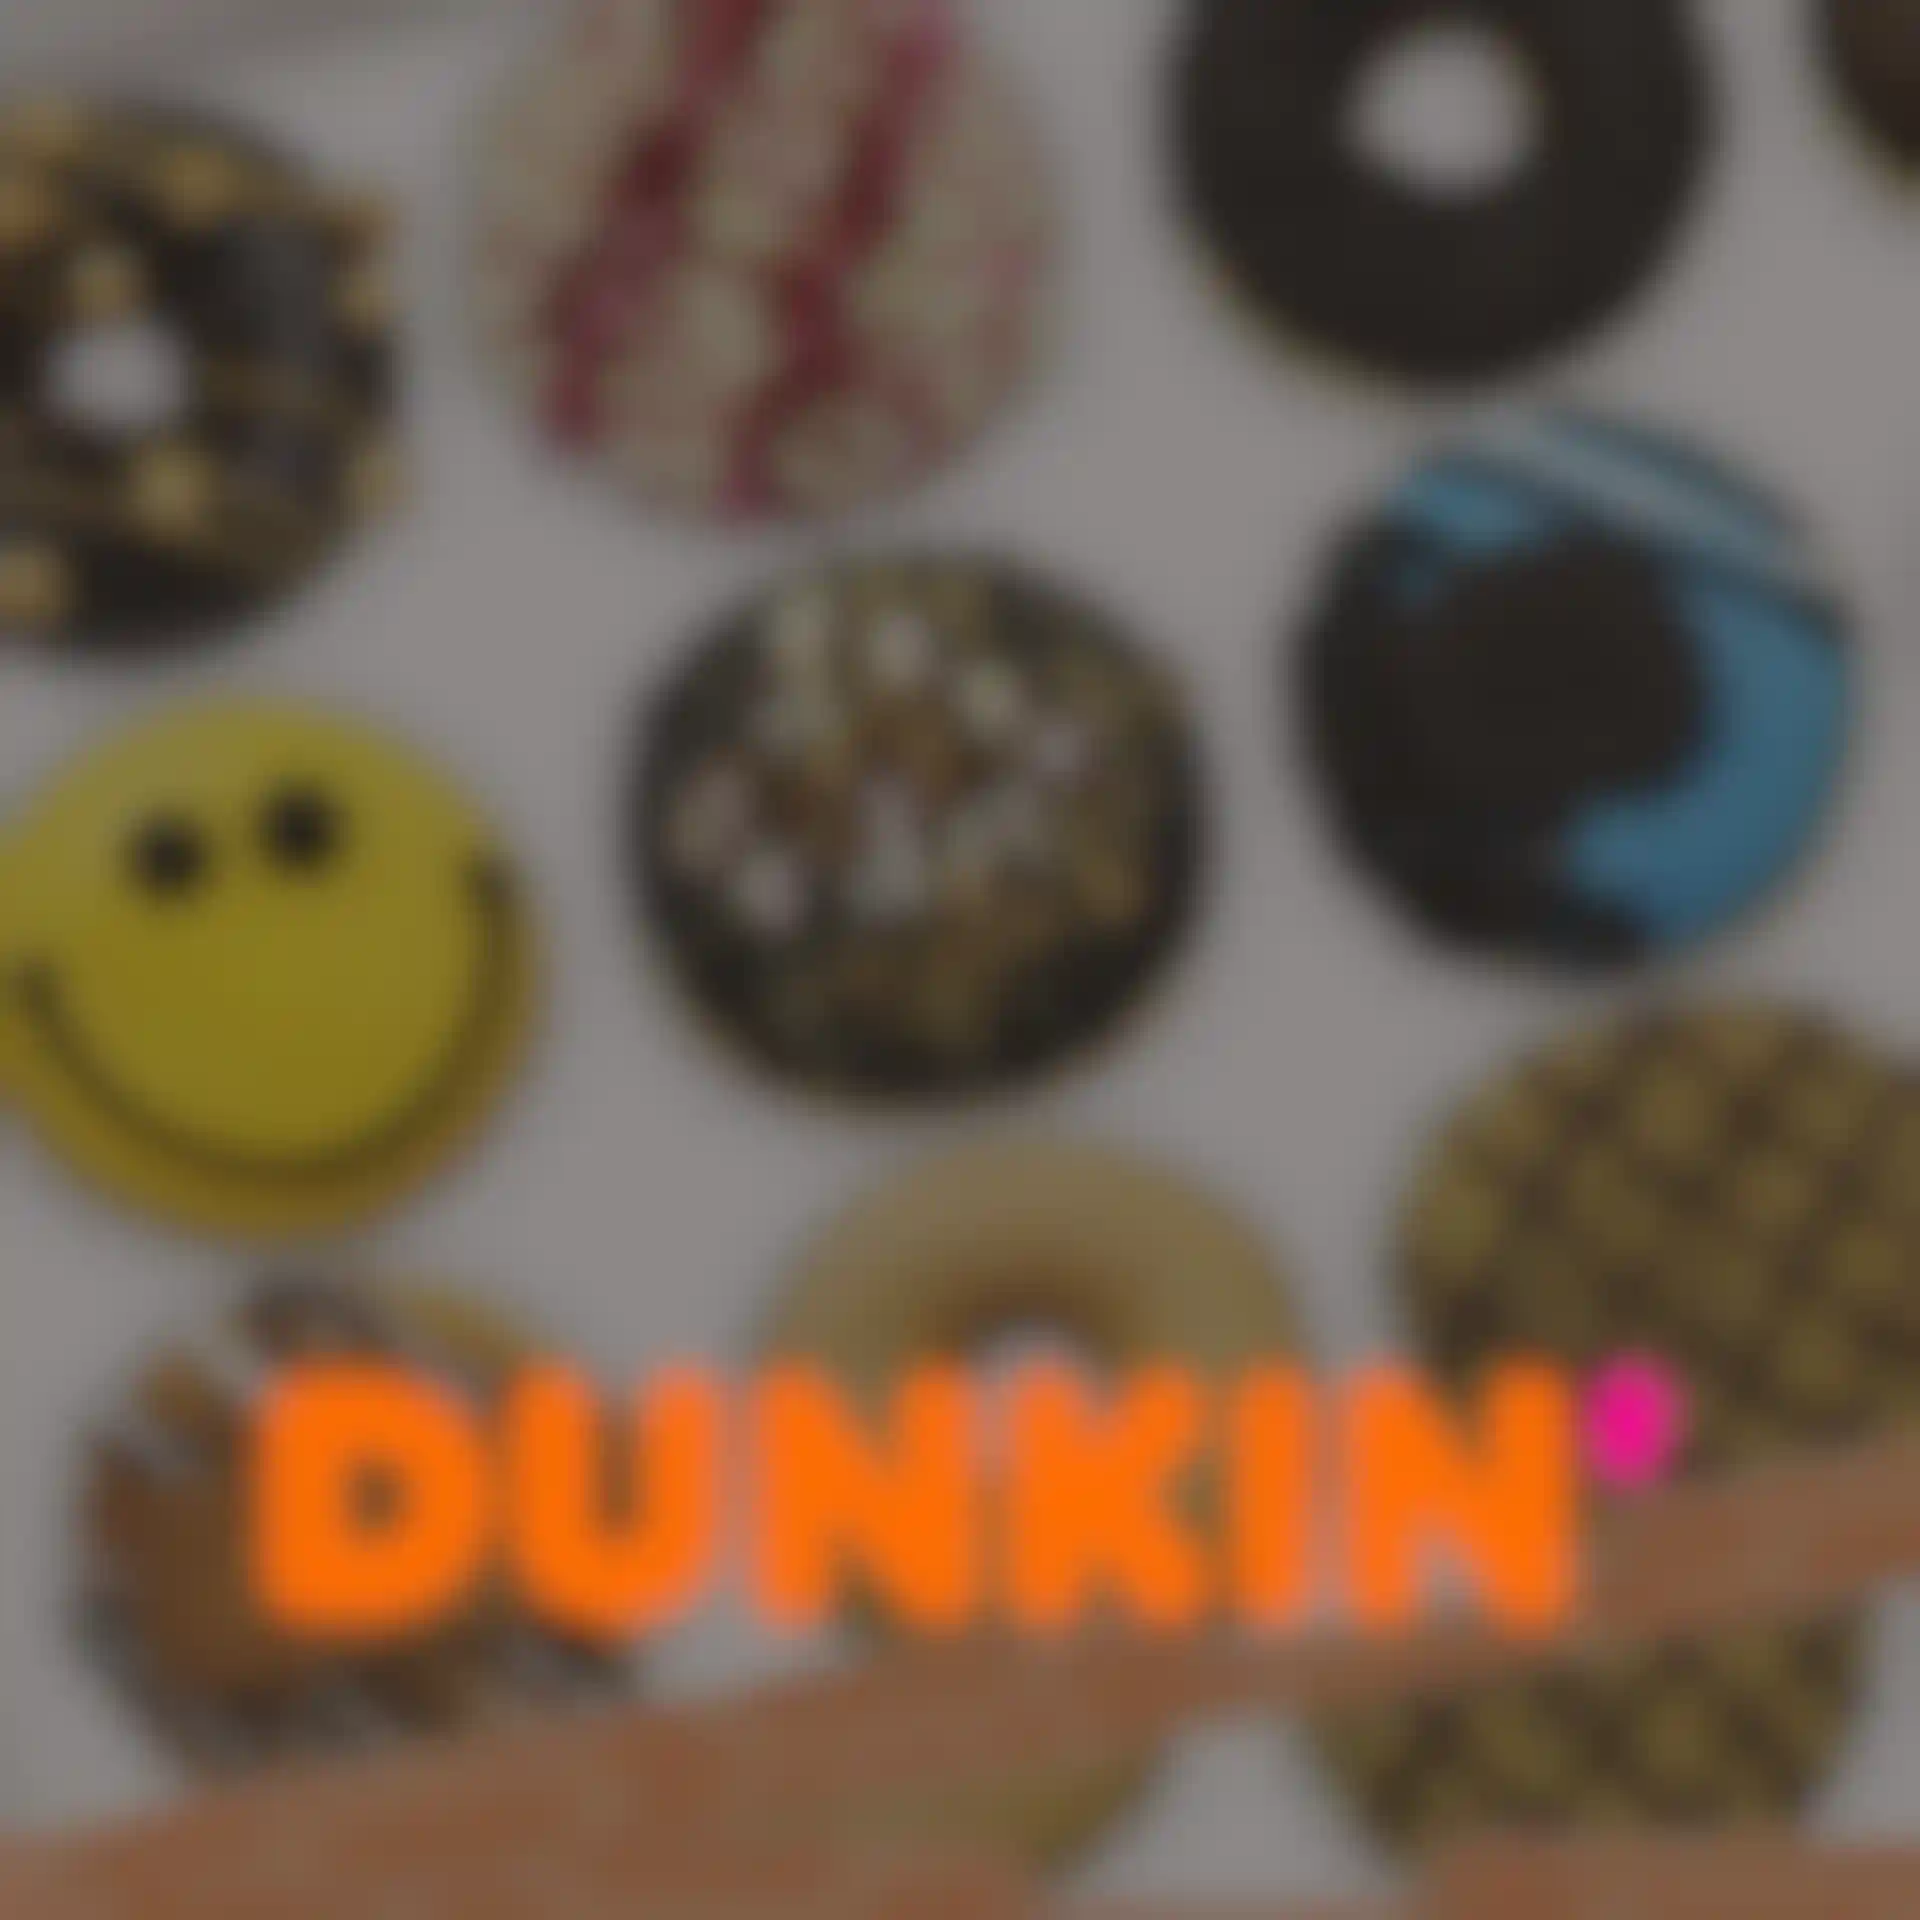 Dunkin' Ads Voice Over Recording